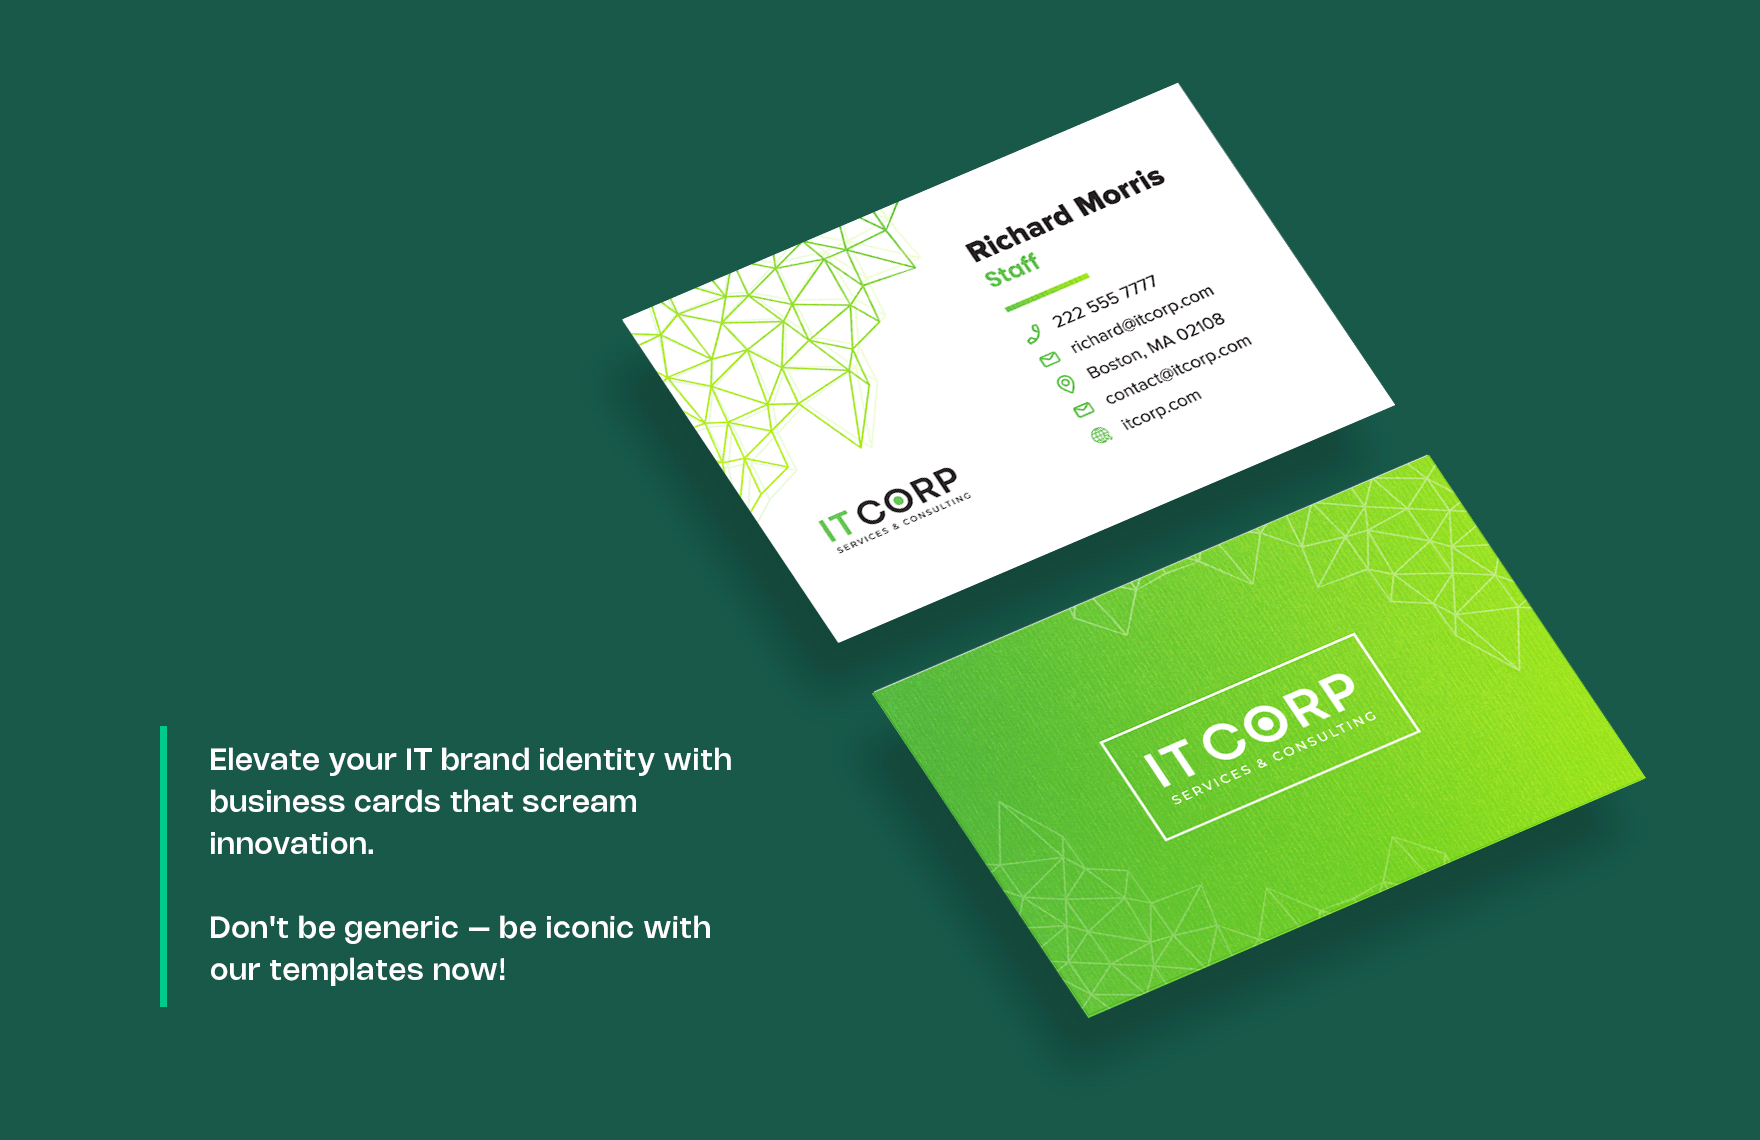 IT Education Technology Consulting Business Card Template